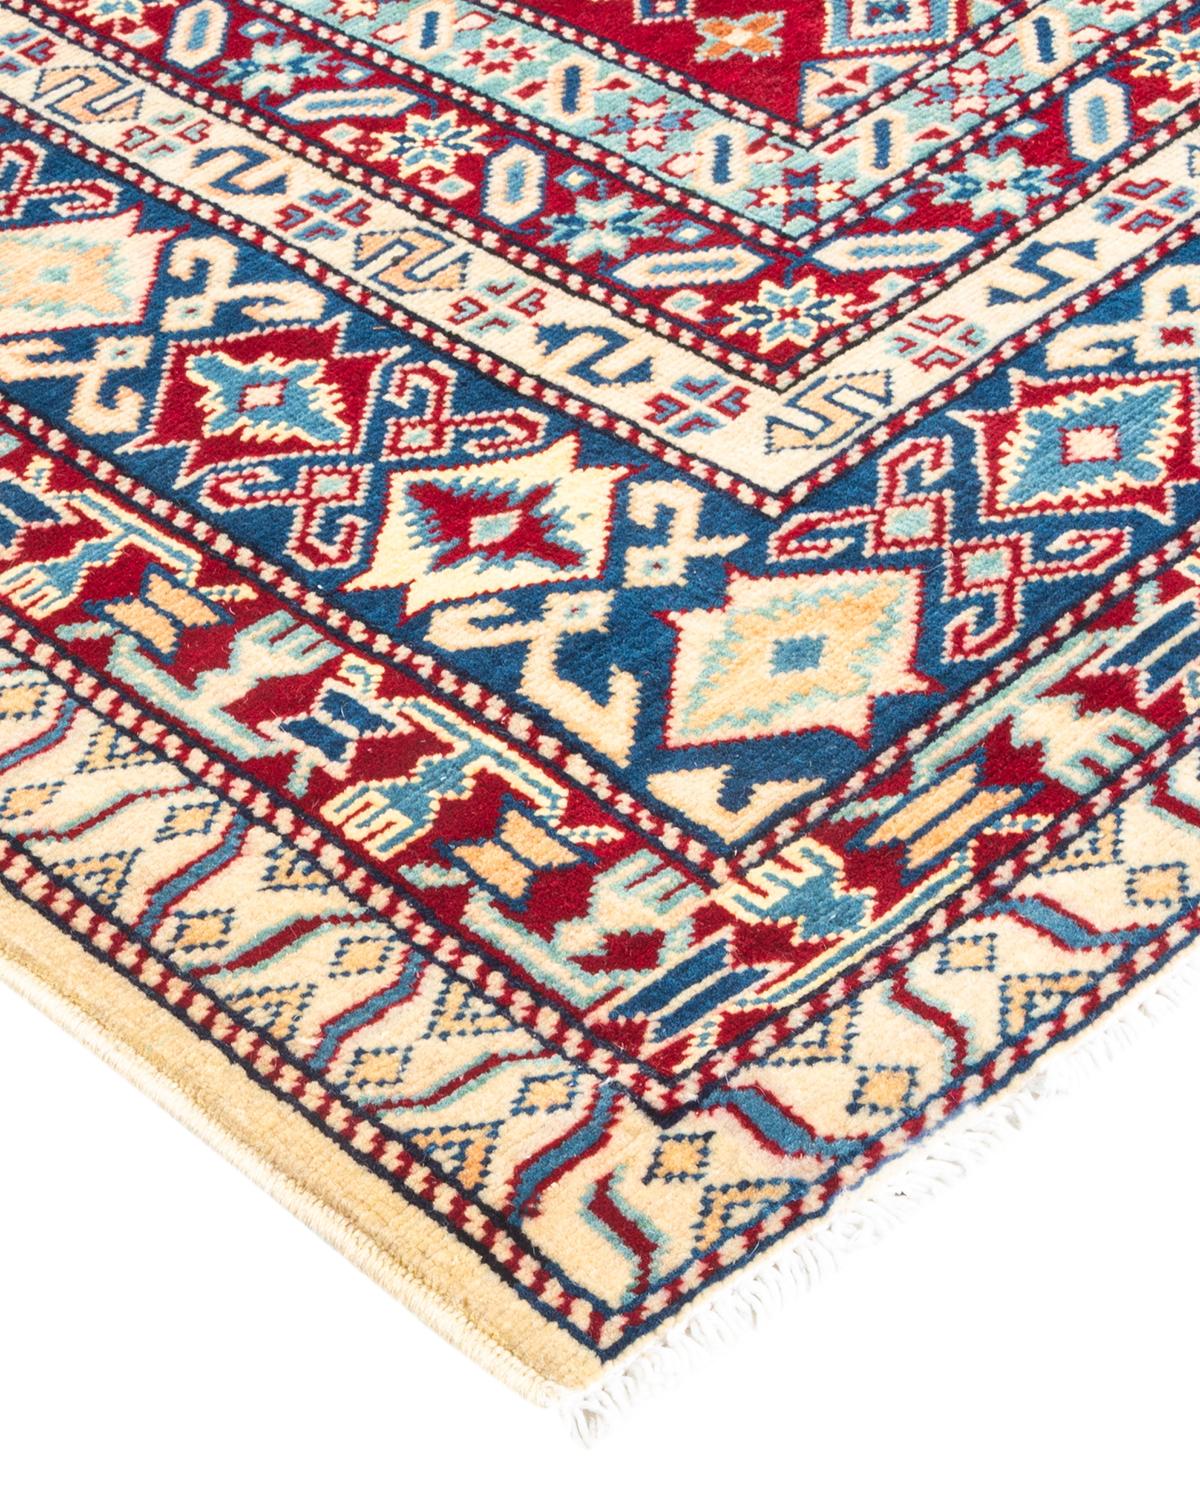 The rich textile tradition of western Africa inspired the Tribal collection of high quality area rugs. Incorporating a medley of geometric motifs, in palettes ranging from earthy to vivacious, these rugs bring a sense of energy as well as plush